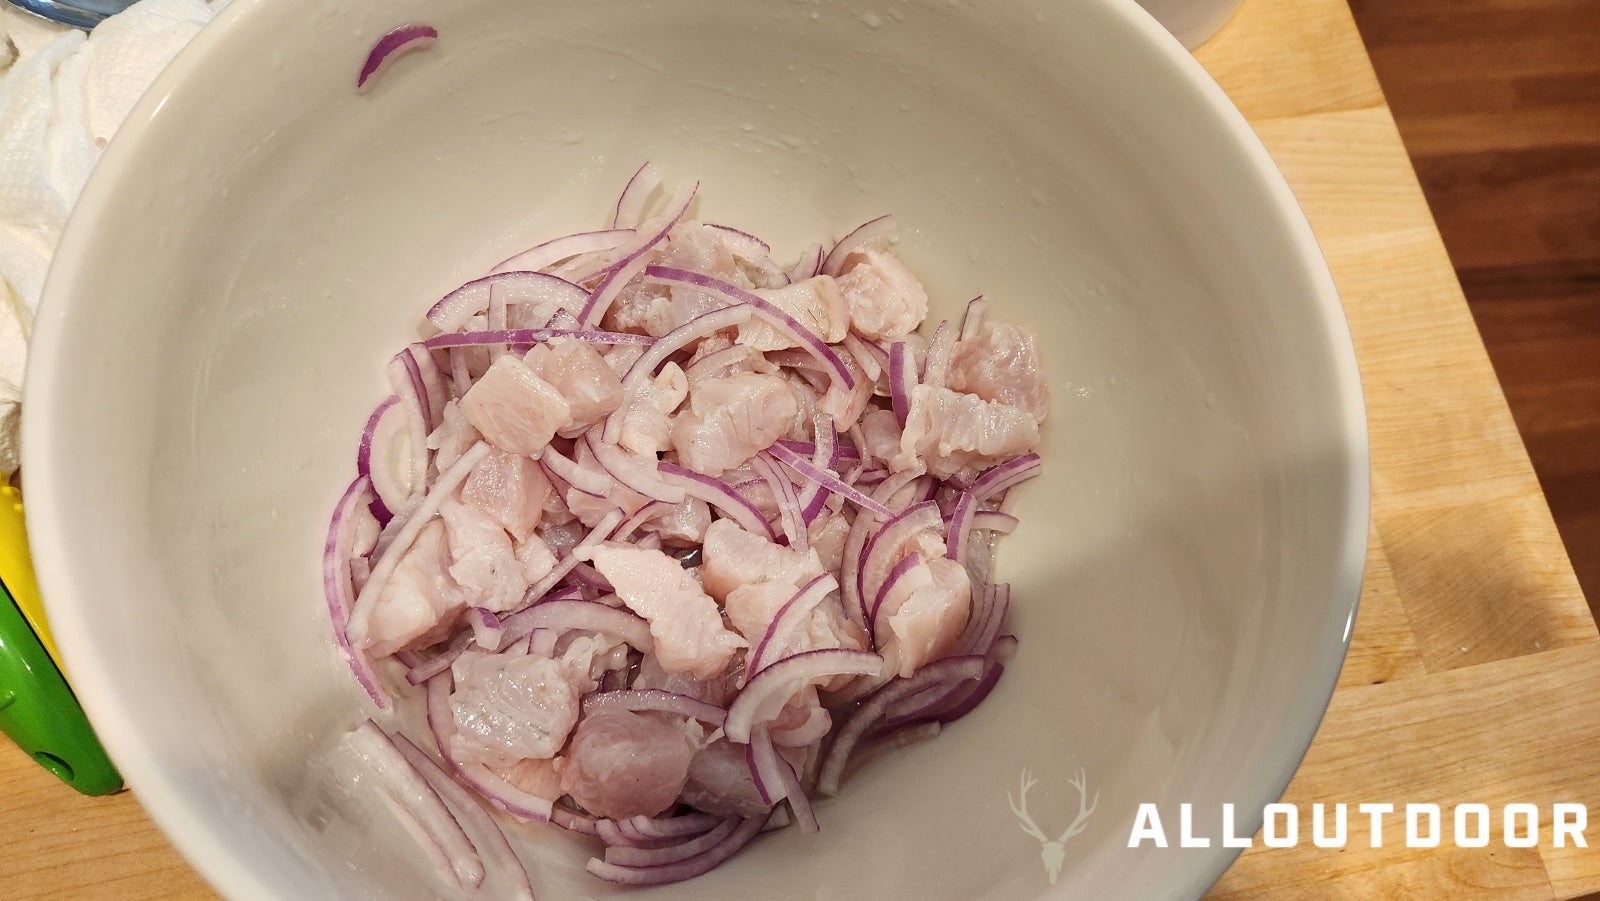 Cook your Catch - Delicious Spanish Mackerel Ceviche